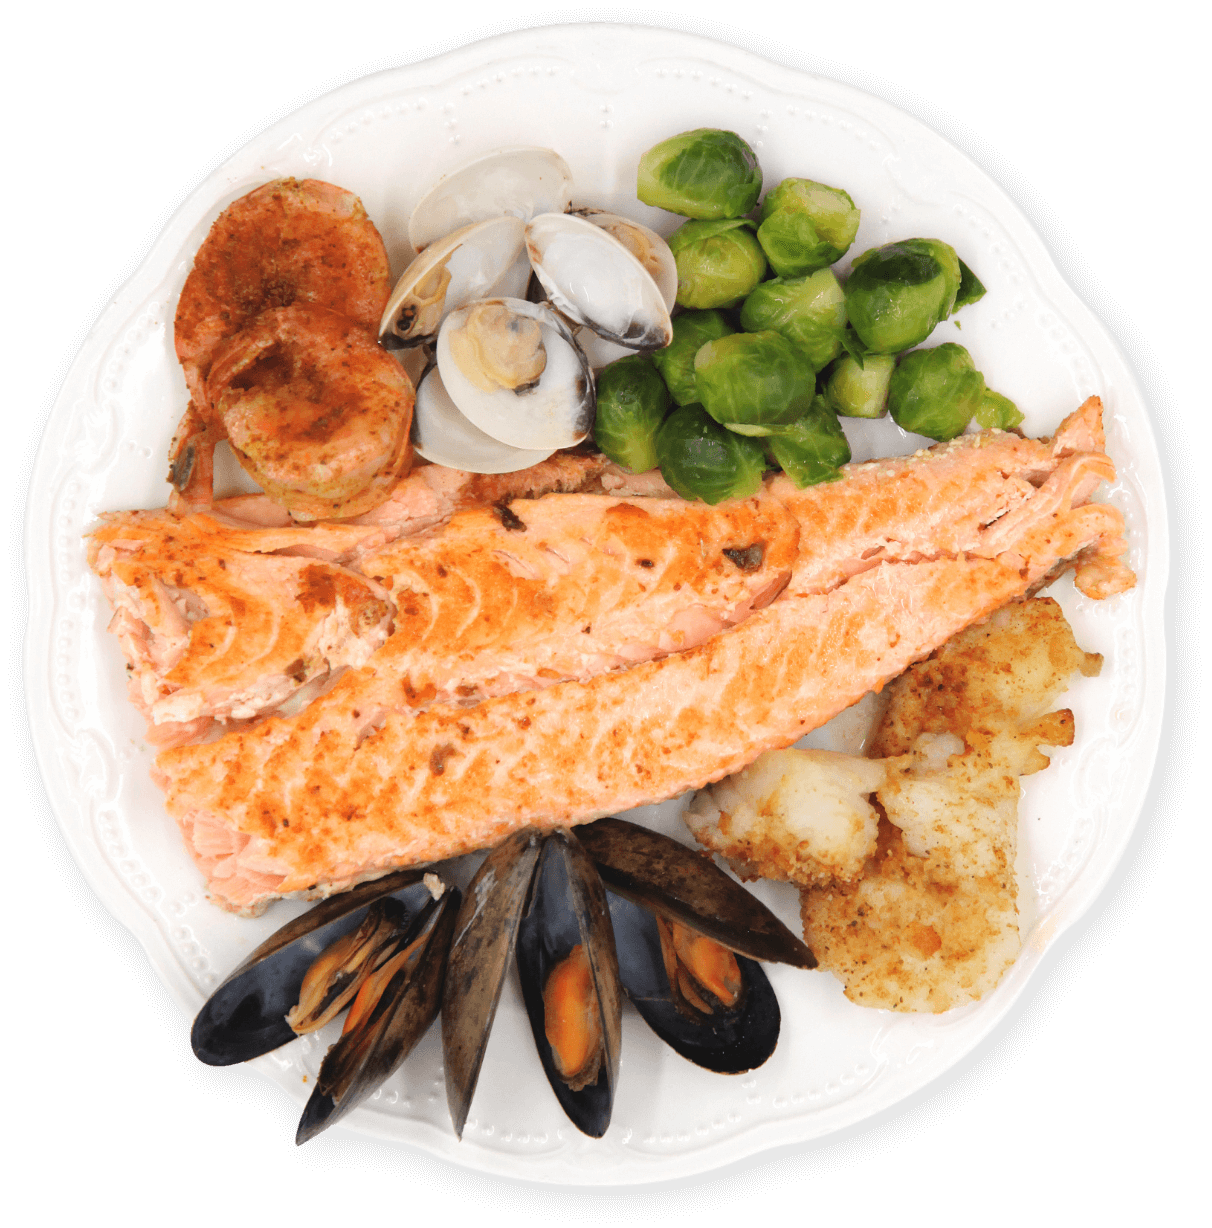 Tuesday special at the Shady Maple smorgasbord featuring high quality seafood, including muscles, salmon, shrimp, clams, and brussel sprouts